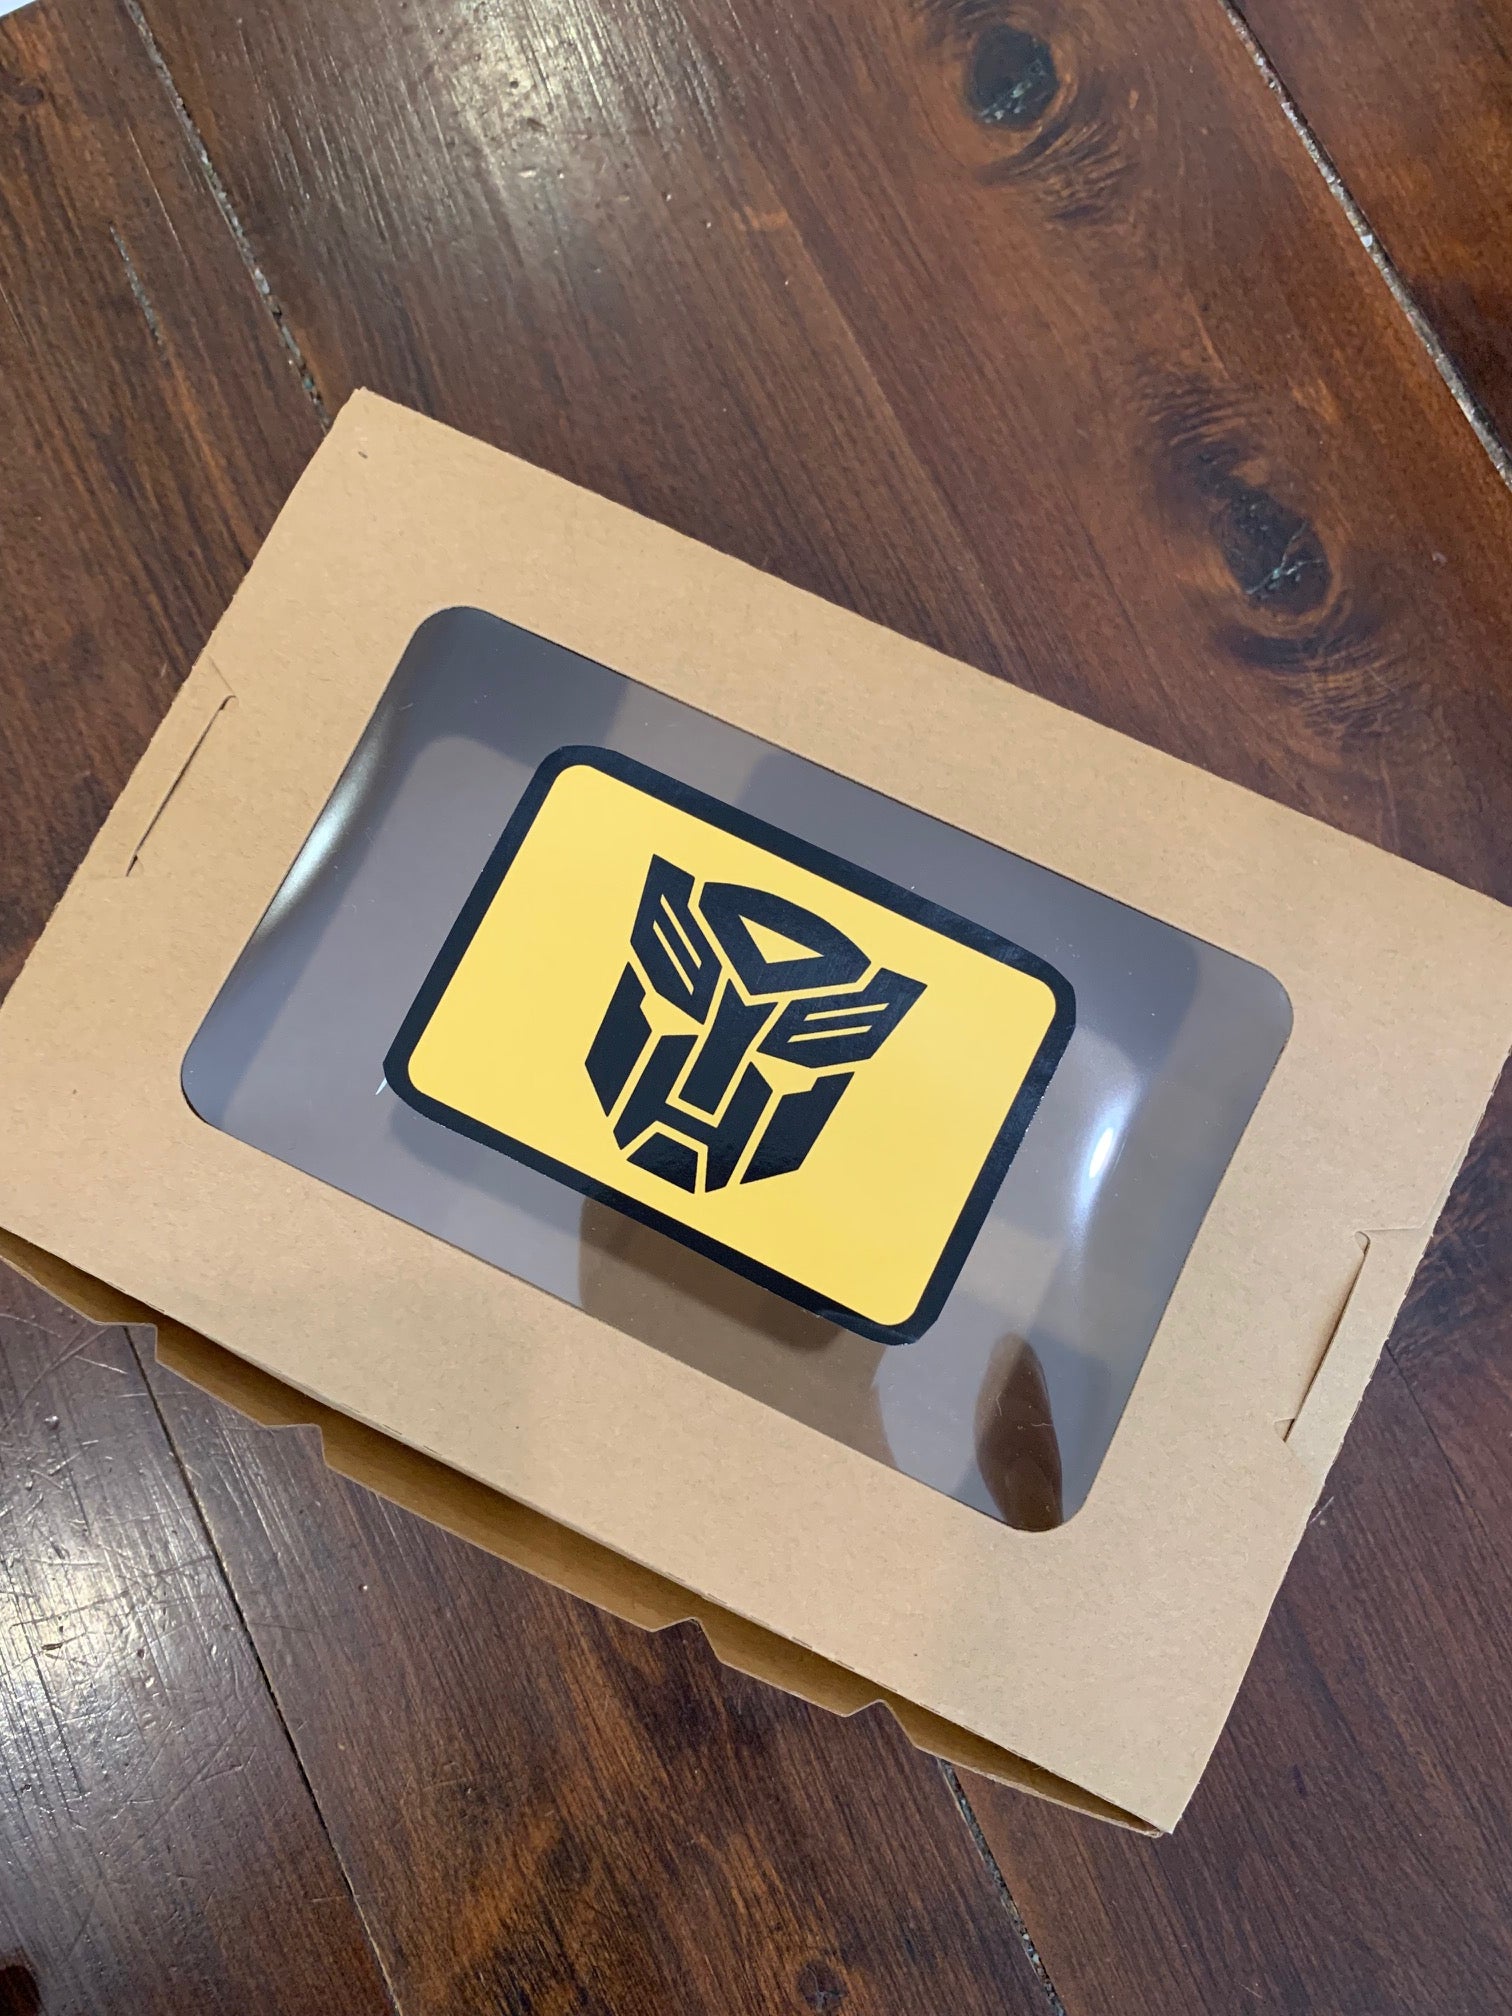 Transformers food boxes party